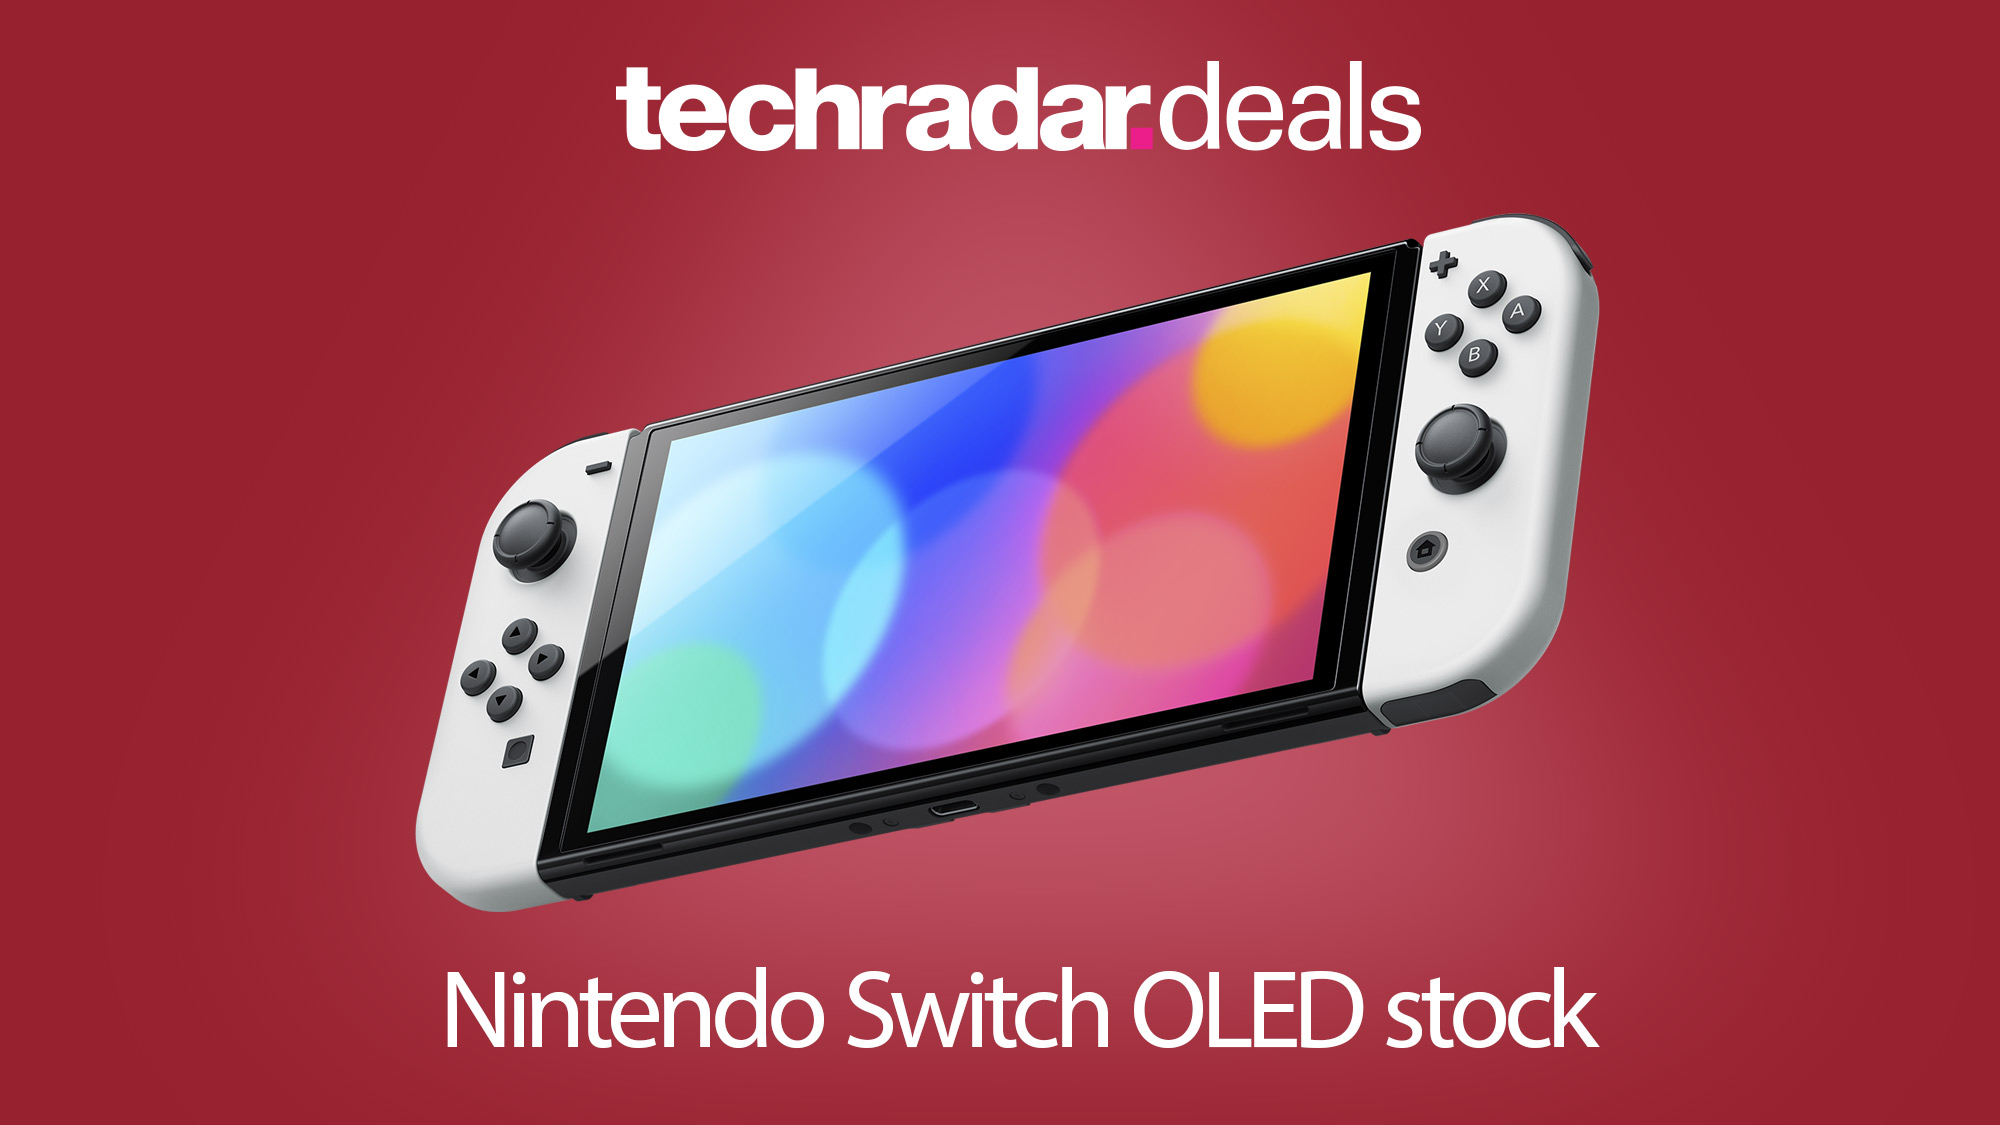 Nintendo Switch OLED Model is back in stock at